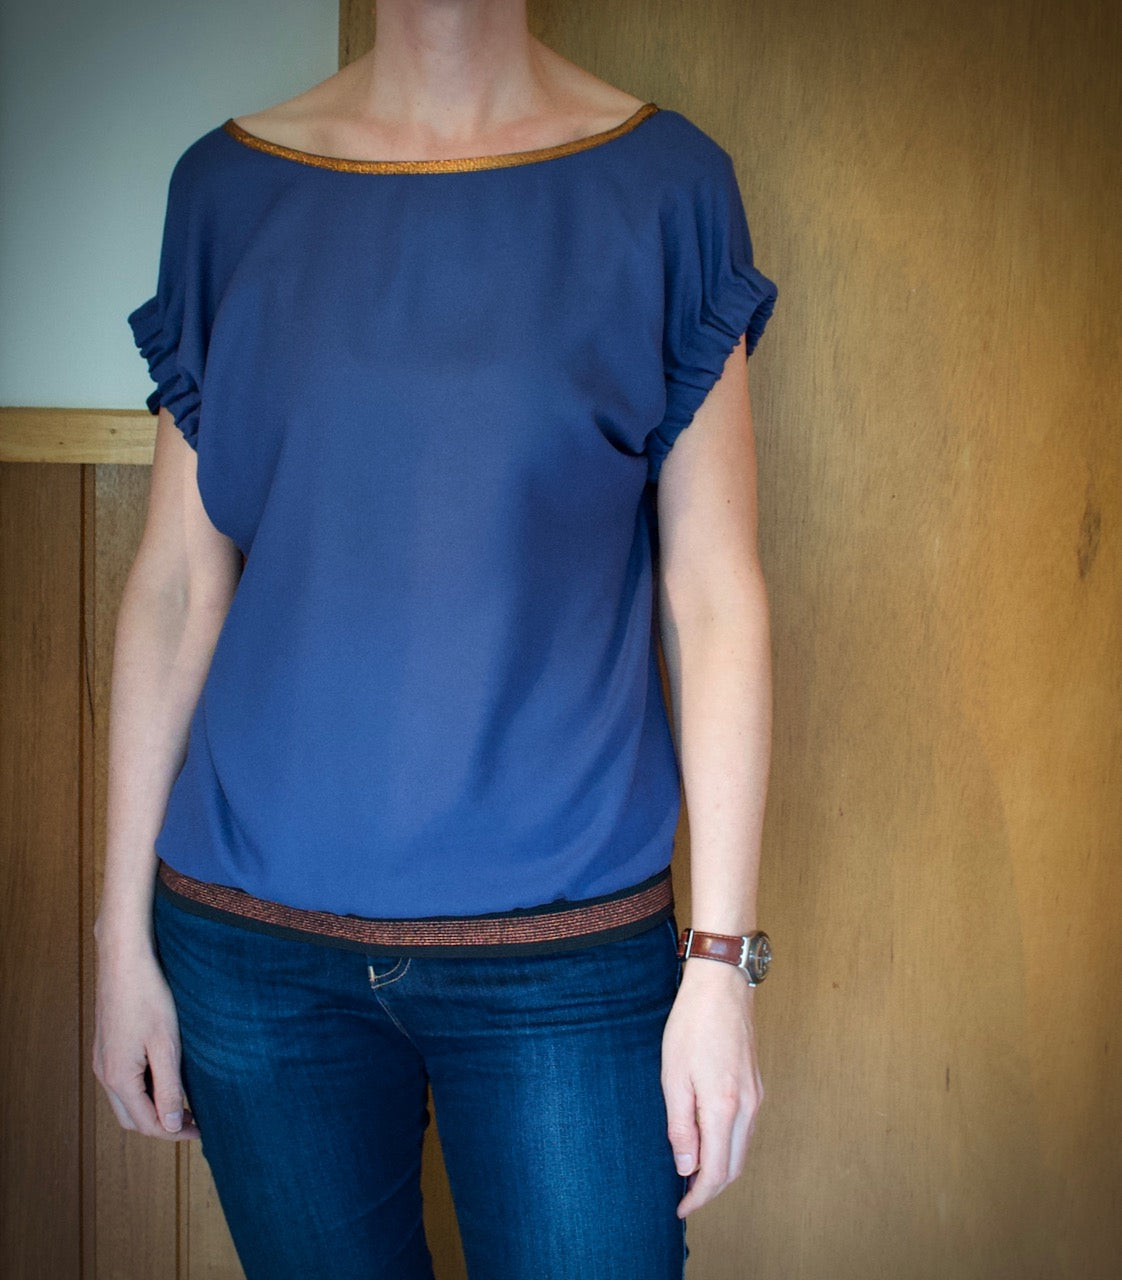 The Frances, a free sewing pattern from Fibre Mood